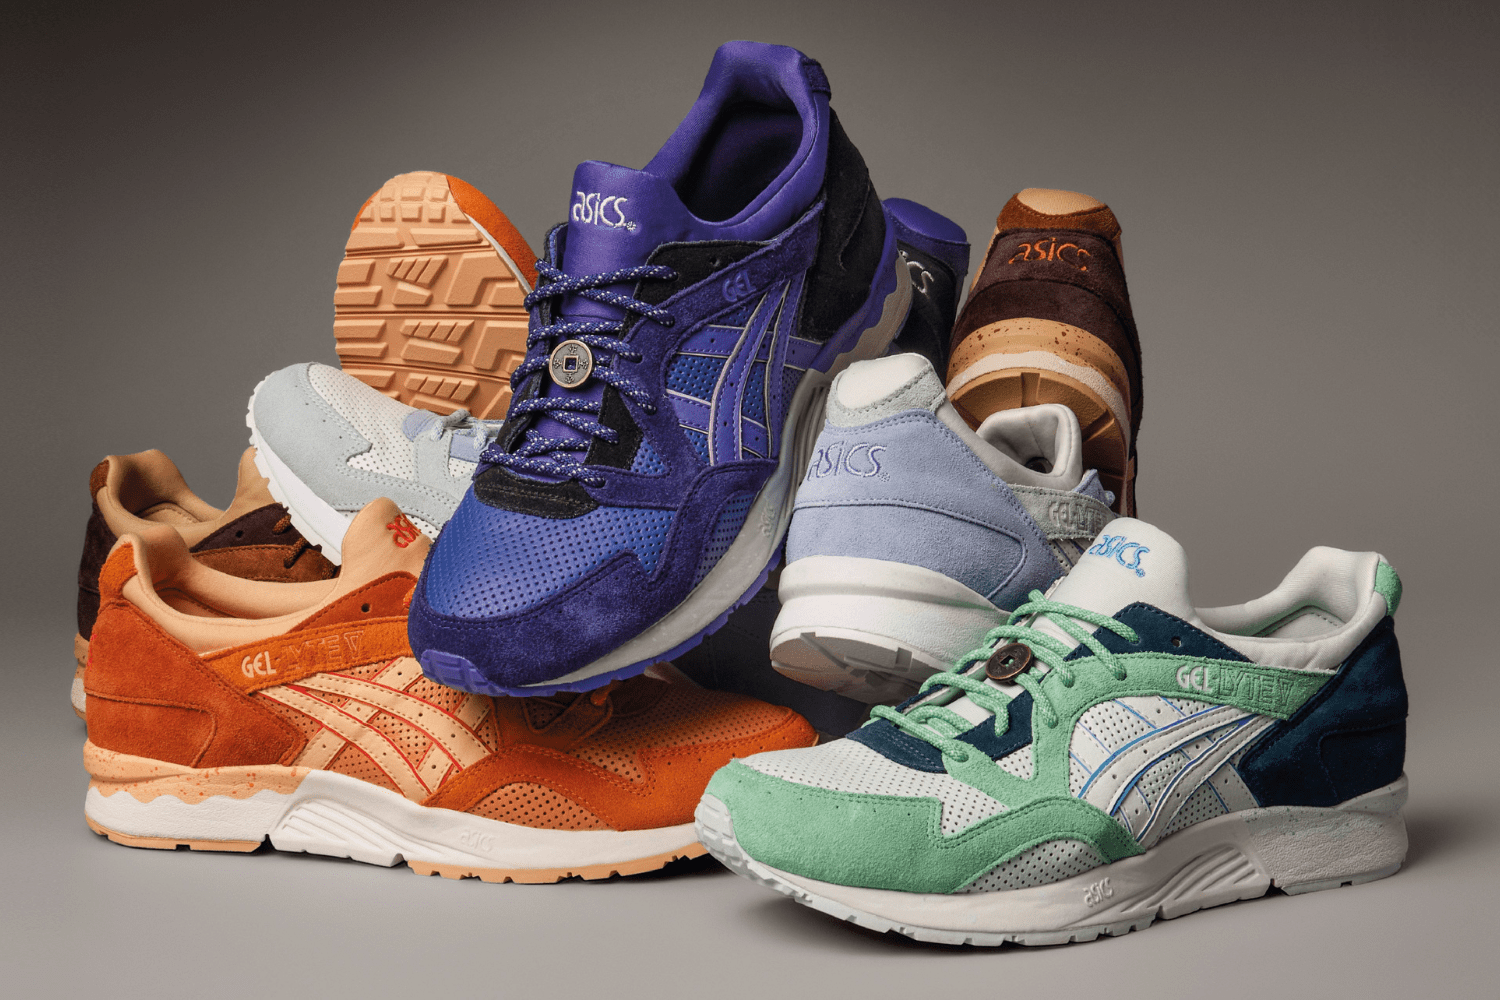 Top 10 ASICS SportStyle silhouettes you need to know about